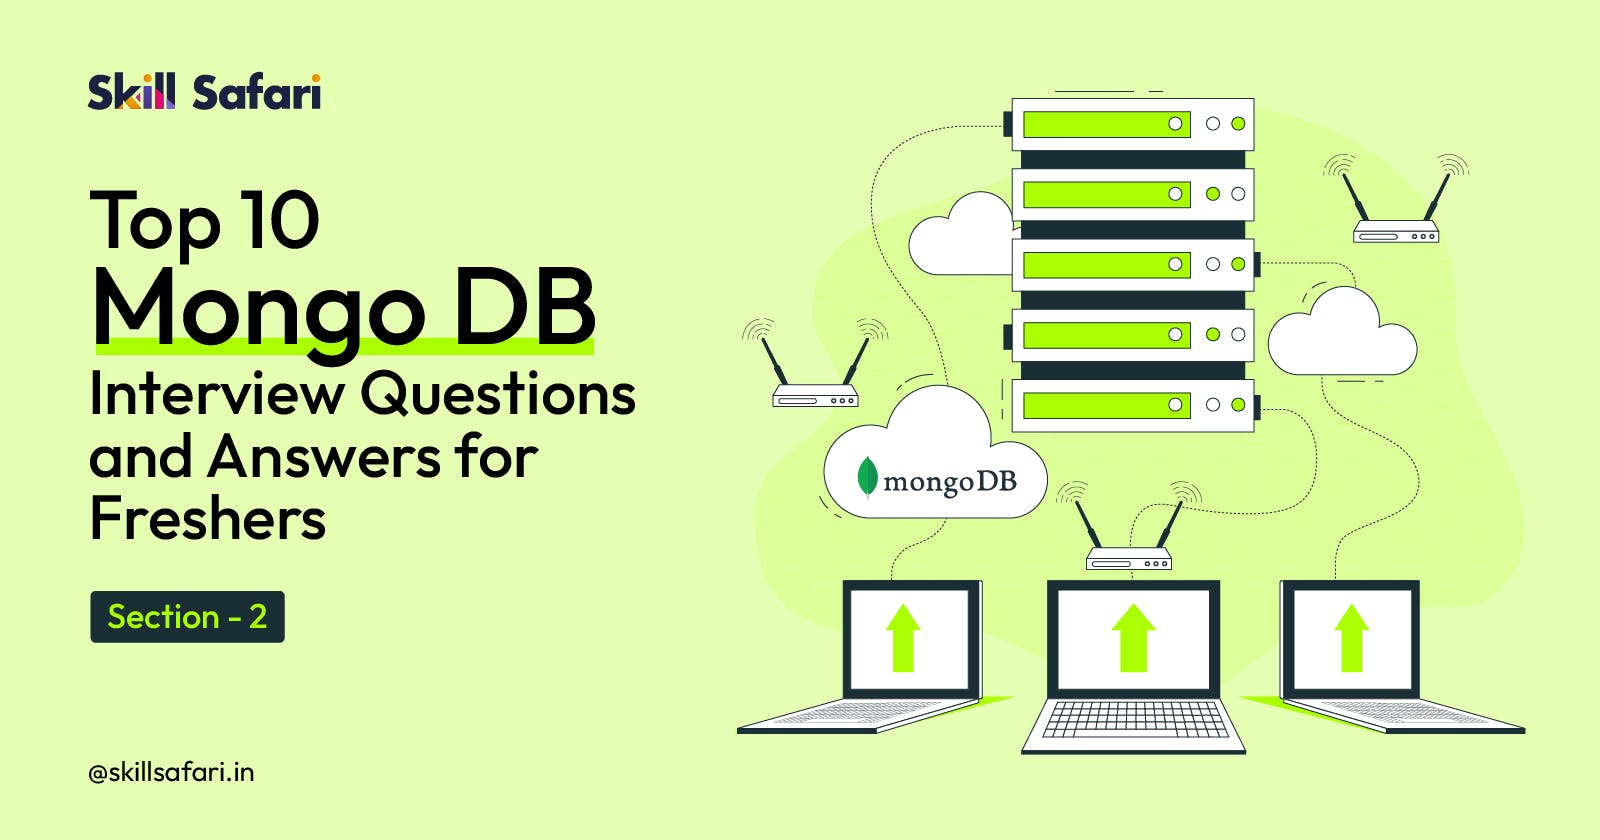 Top 10 MongoDB Interview Questions and Answers for Freshers Section - 2